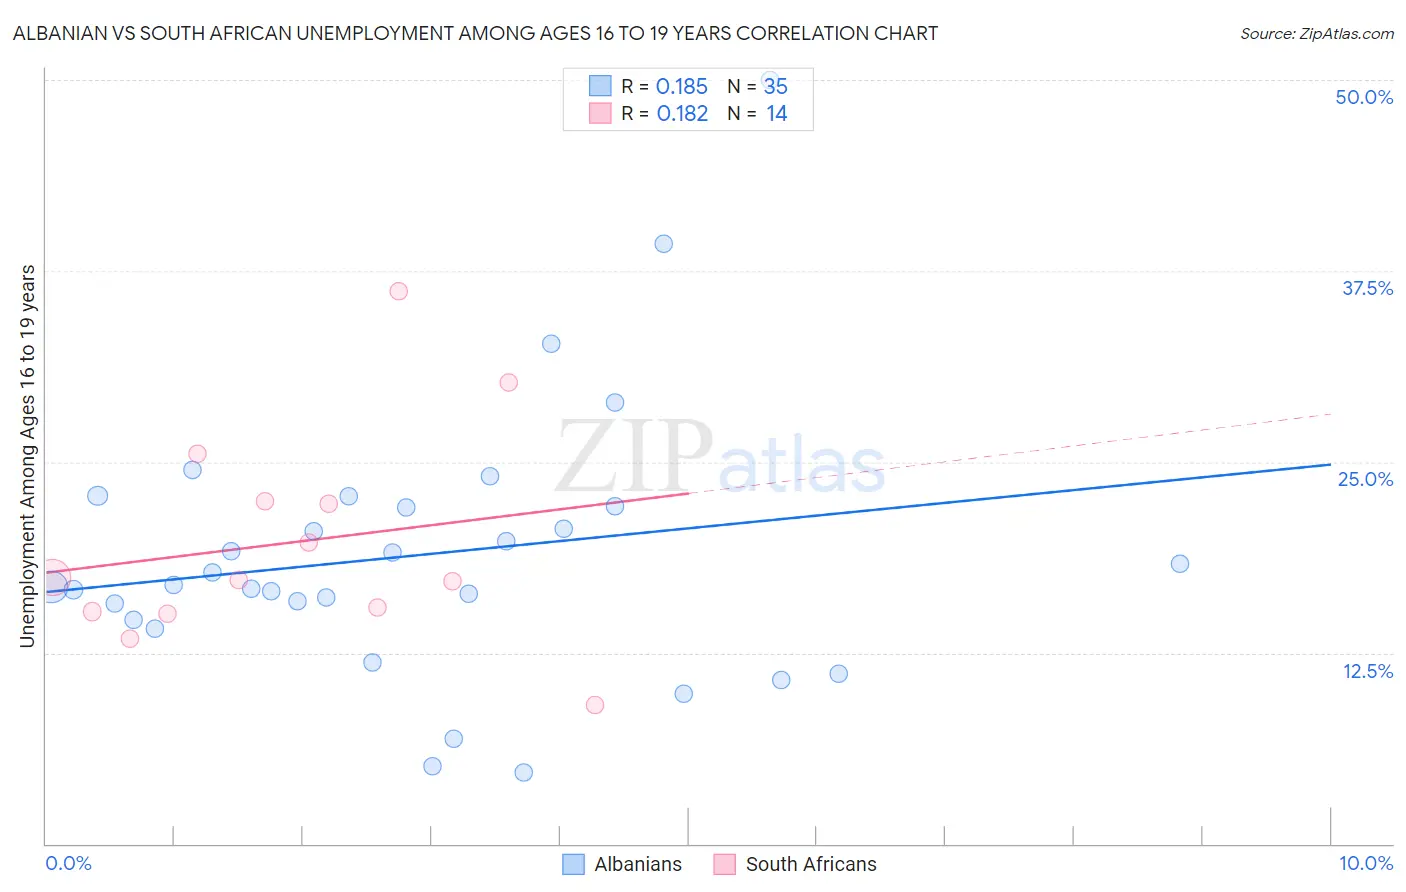 Albanian vs South African Unemployment Among Ages 16 to 19 years